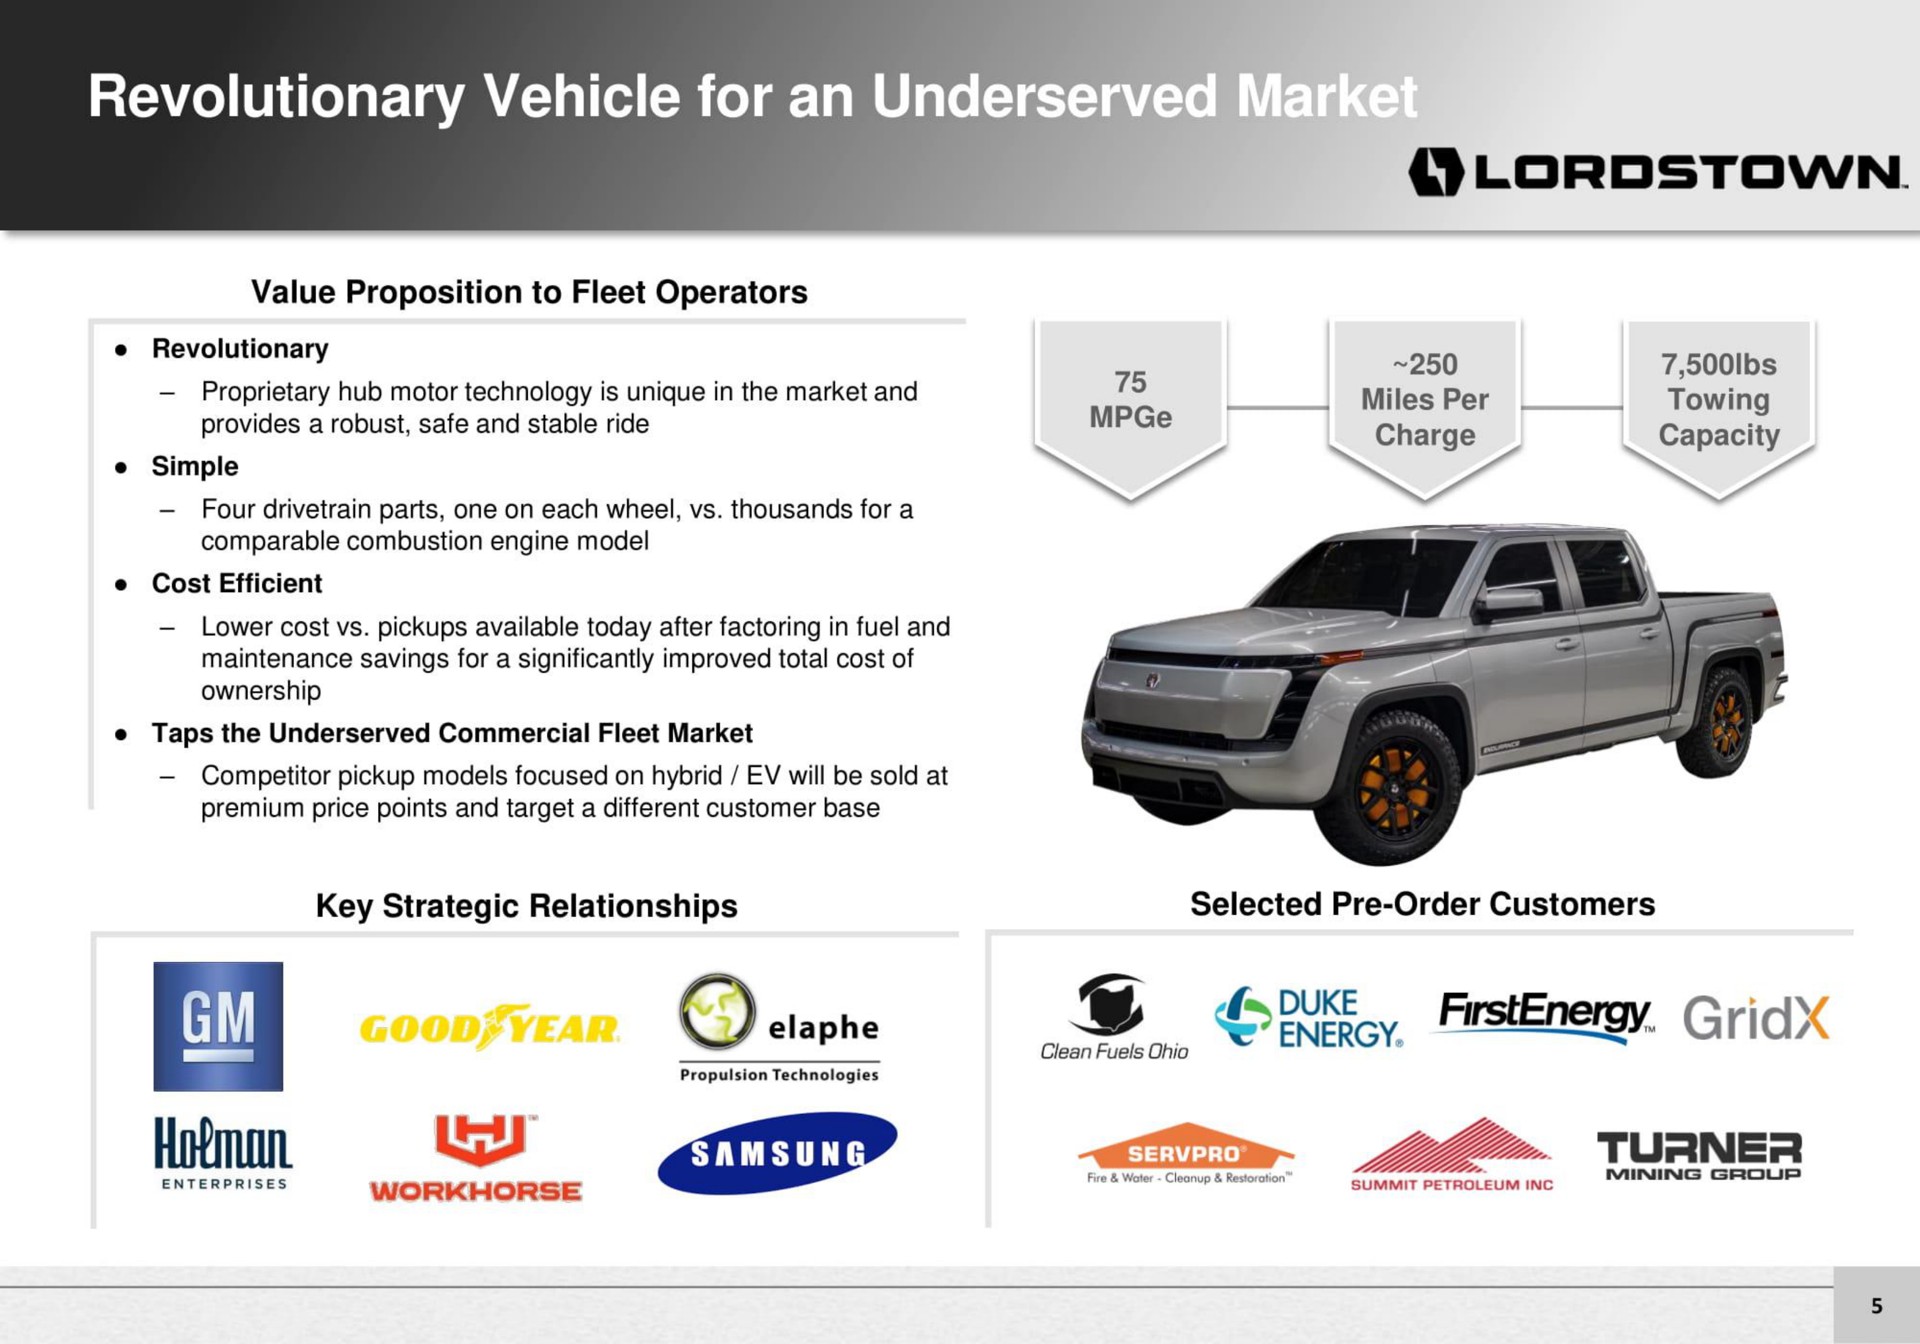 revolutionary vehicle for an grid | Lordstown Motors